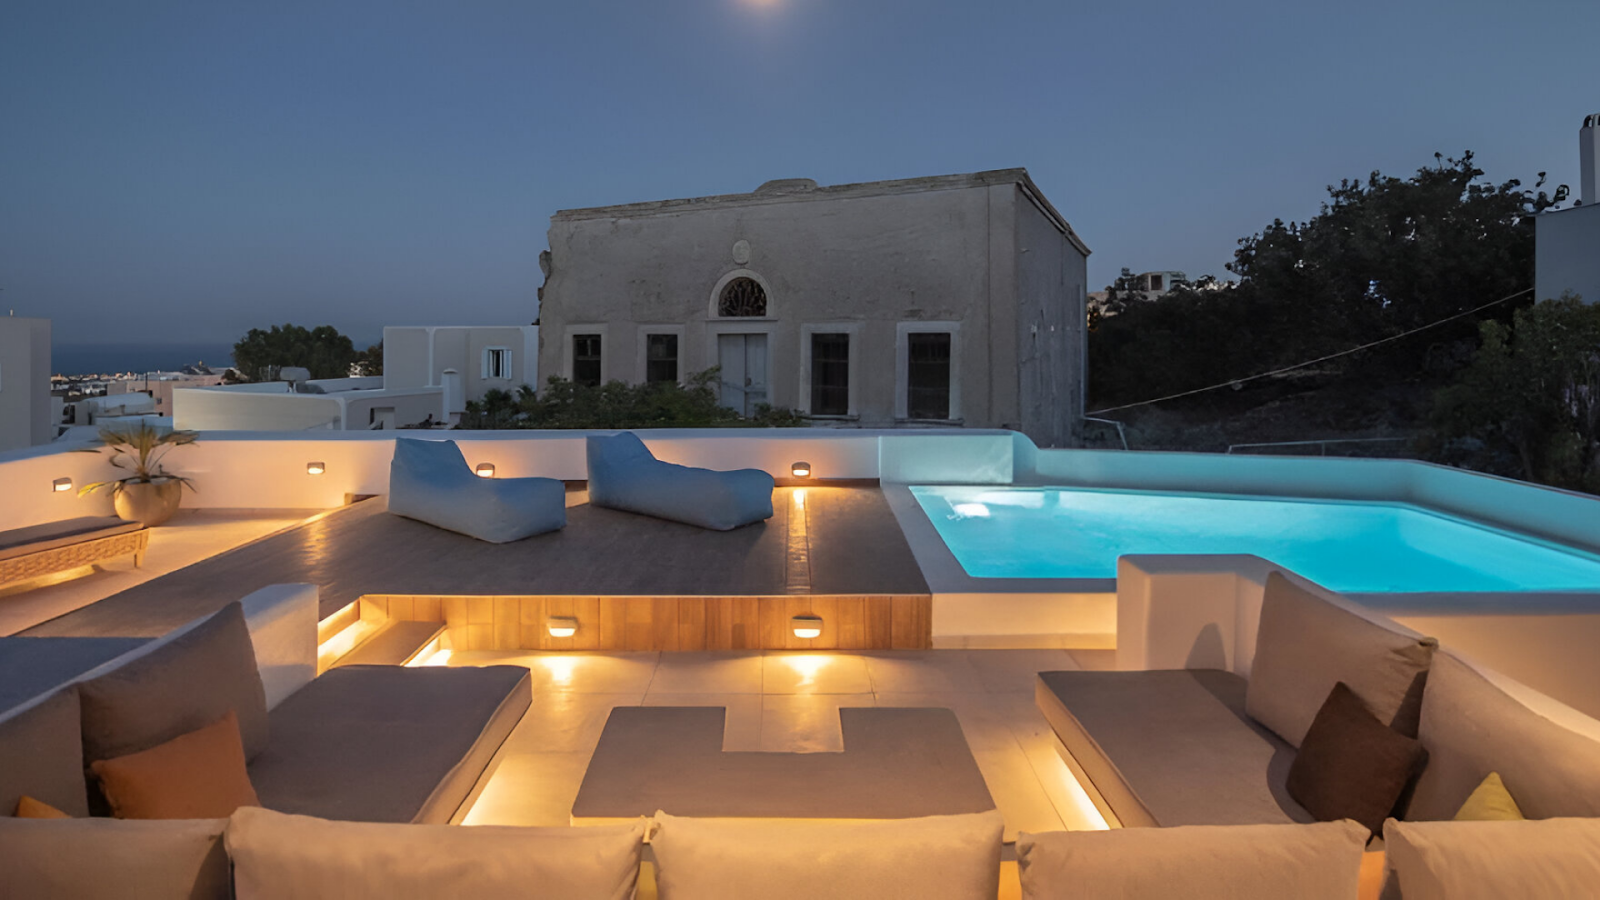 Couches and sun loungers beside the pool of a luxury villa in Santorini.